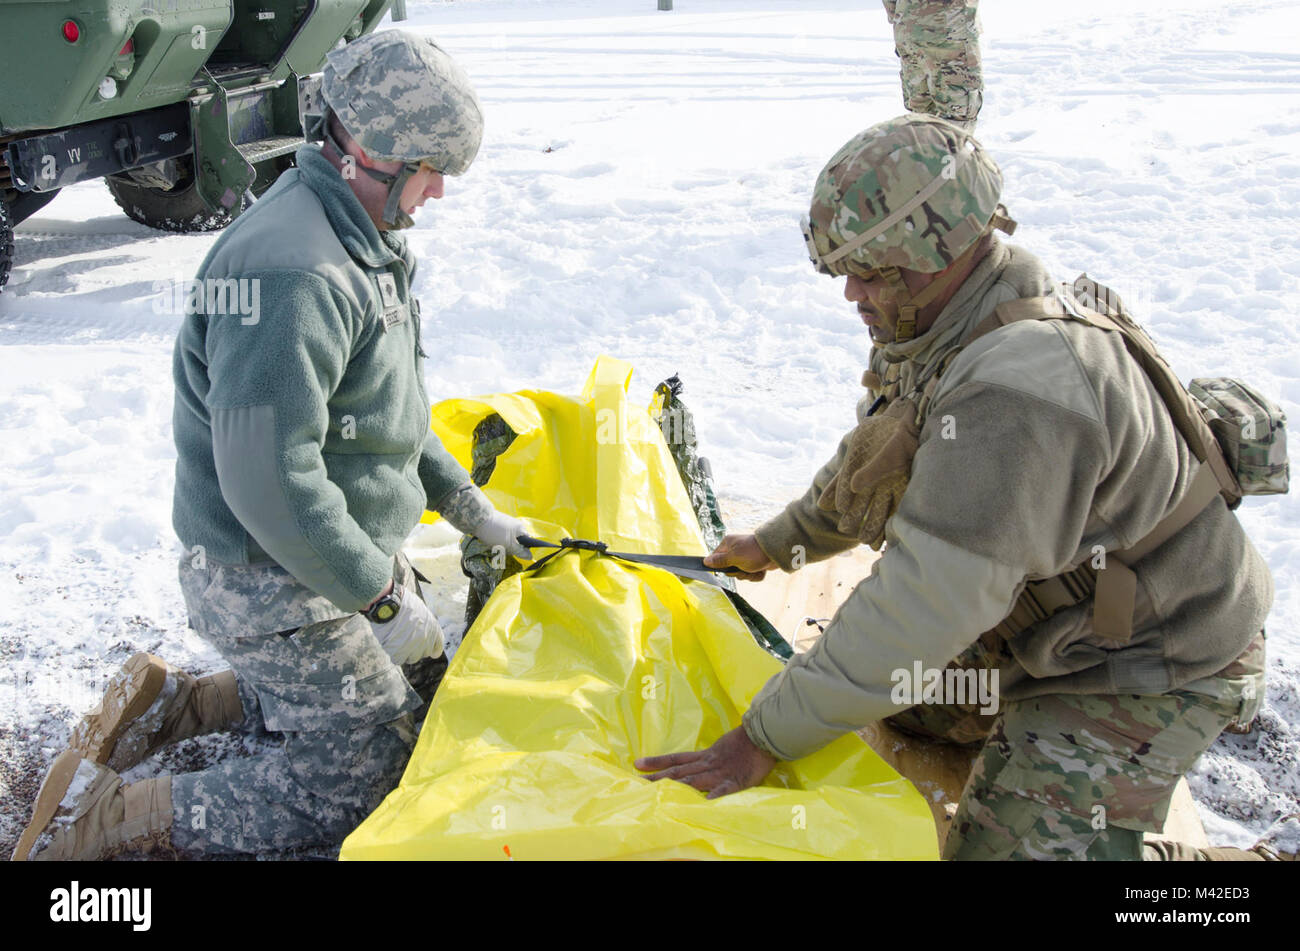 FORT MCCOY, Wis. - U.S. Army Reserve Staff Sgt. Javar Manley (right) and Spc. Jonathan Hessel, medics, Task Force Triad, Operation Cold Steel II, strap an emergency patient simulator to a litter during a medical evacuation rehearsal at Fort McCoy, Wis., Feb. 8, 2018. Operation Cold Steel is the U.S. Army Reserve’s crew-served weapons qualification and validation exercise to ensure America’s Army Reserve units and Soldiers are trained and ready to deploy on short-notice as part of Ready Force X and bring combat-ready and lethal firepower in support of the Army and our joint partners anywhere in Stock Photo